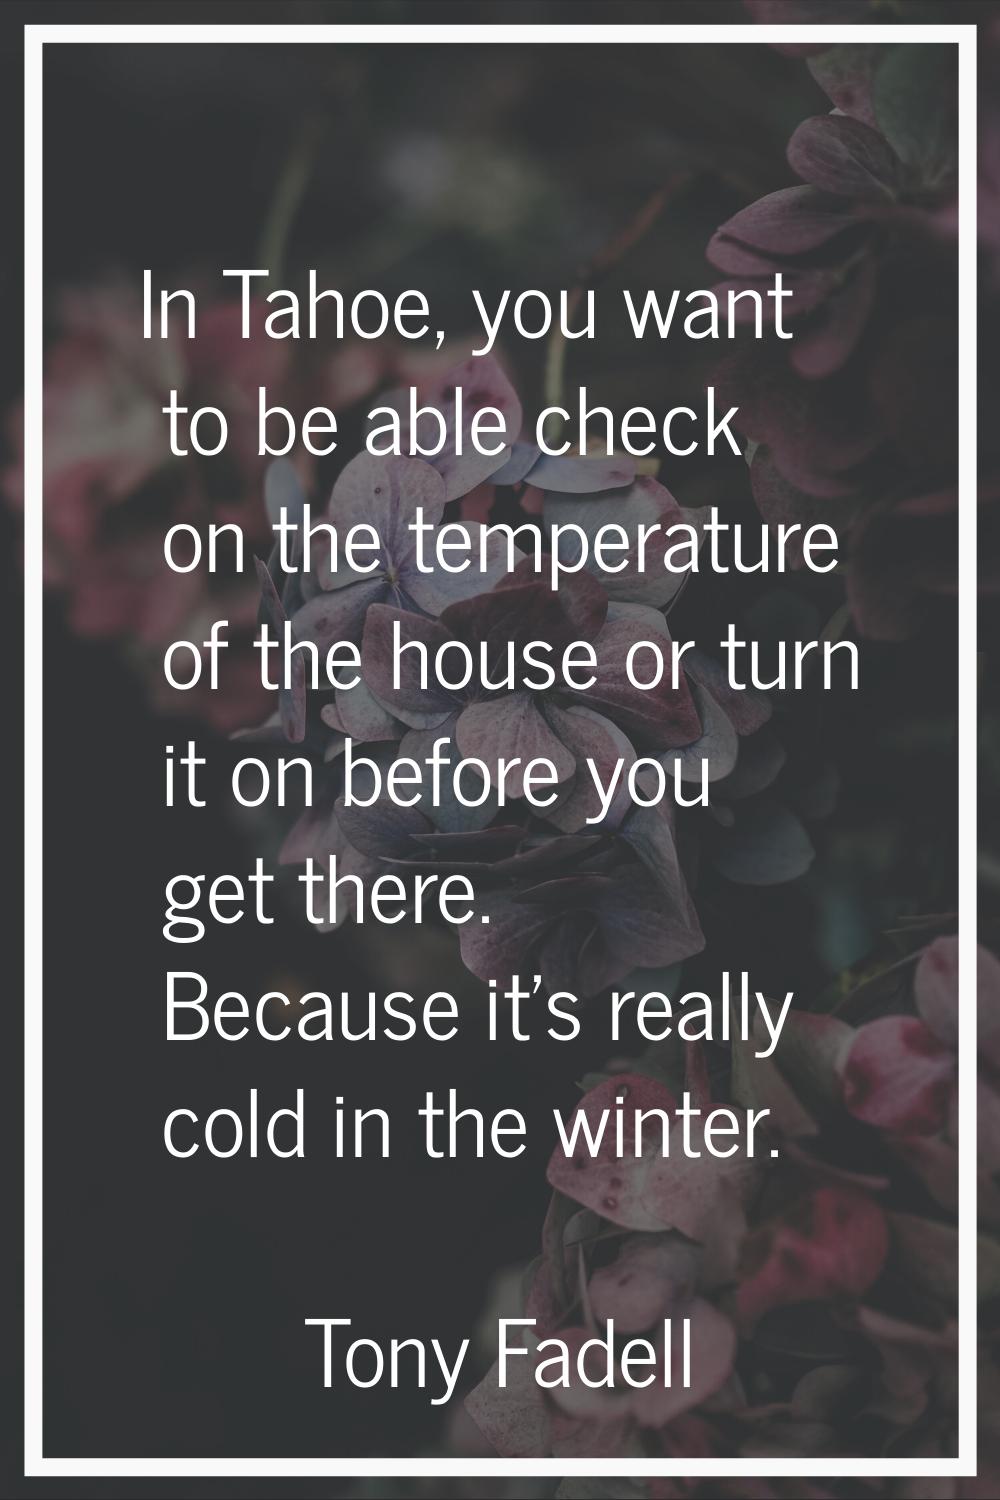 In Tahoe, you want to be able check on the temperature of the house or turn it on before you get th